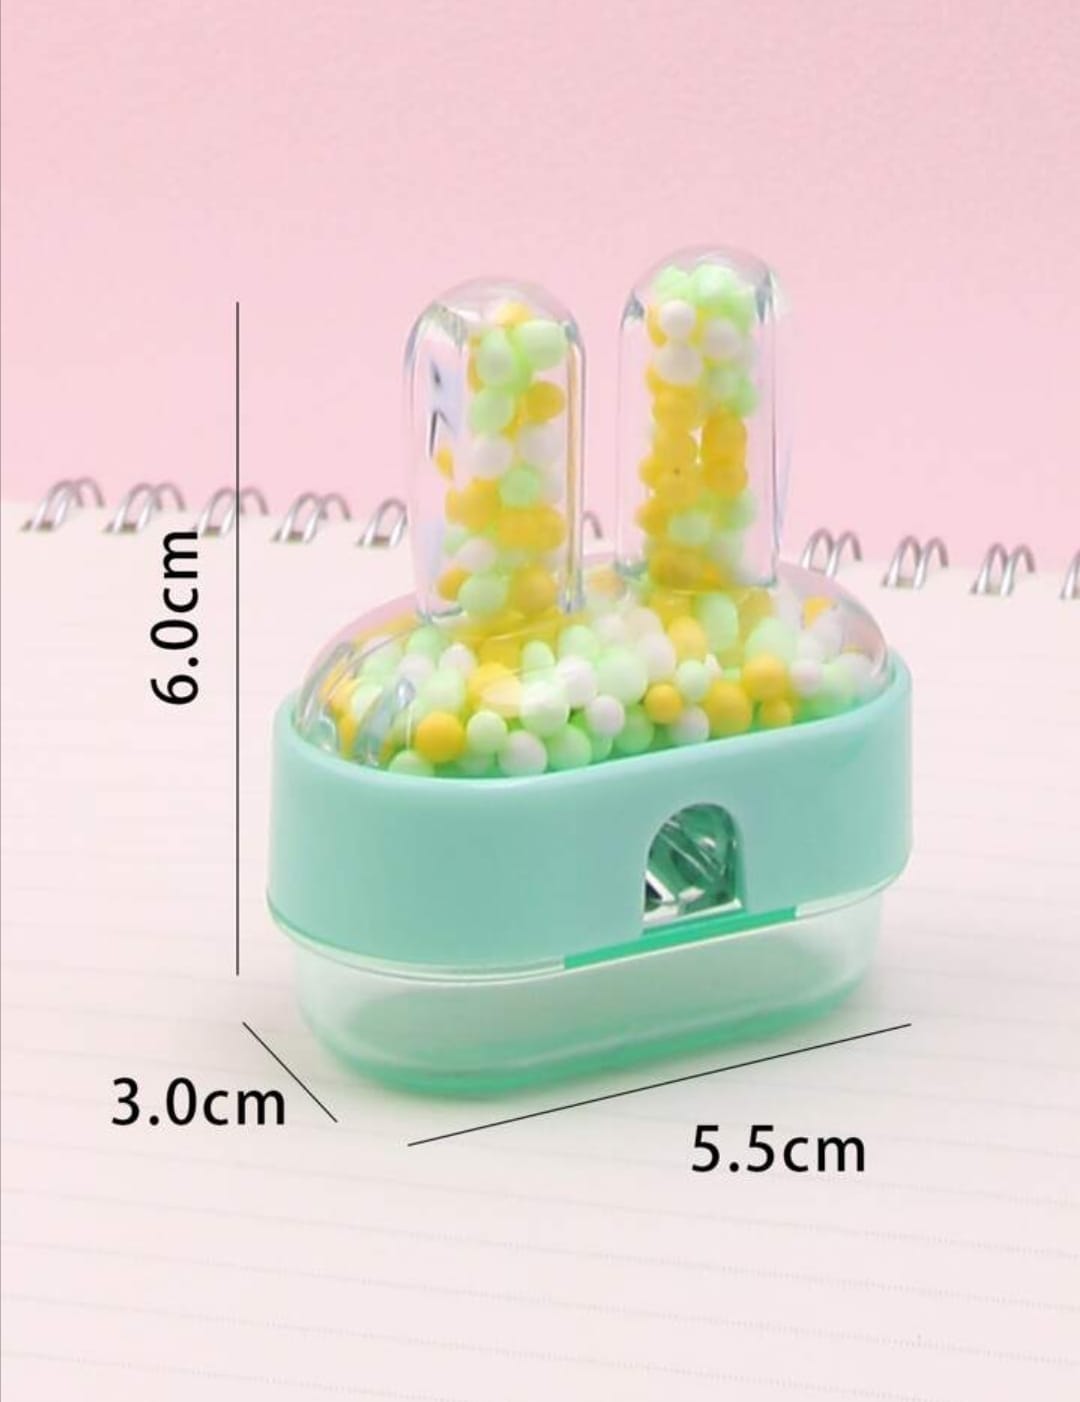 Paradise Soft Toys Sharpeners Colorful Small Table Sharpener - Perfect for Home, Office, and School Use!